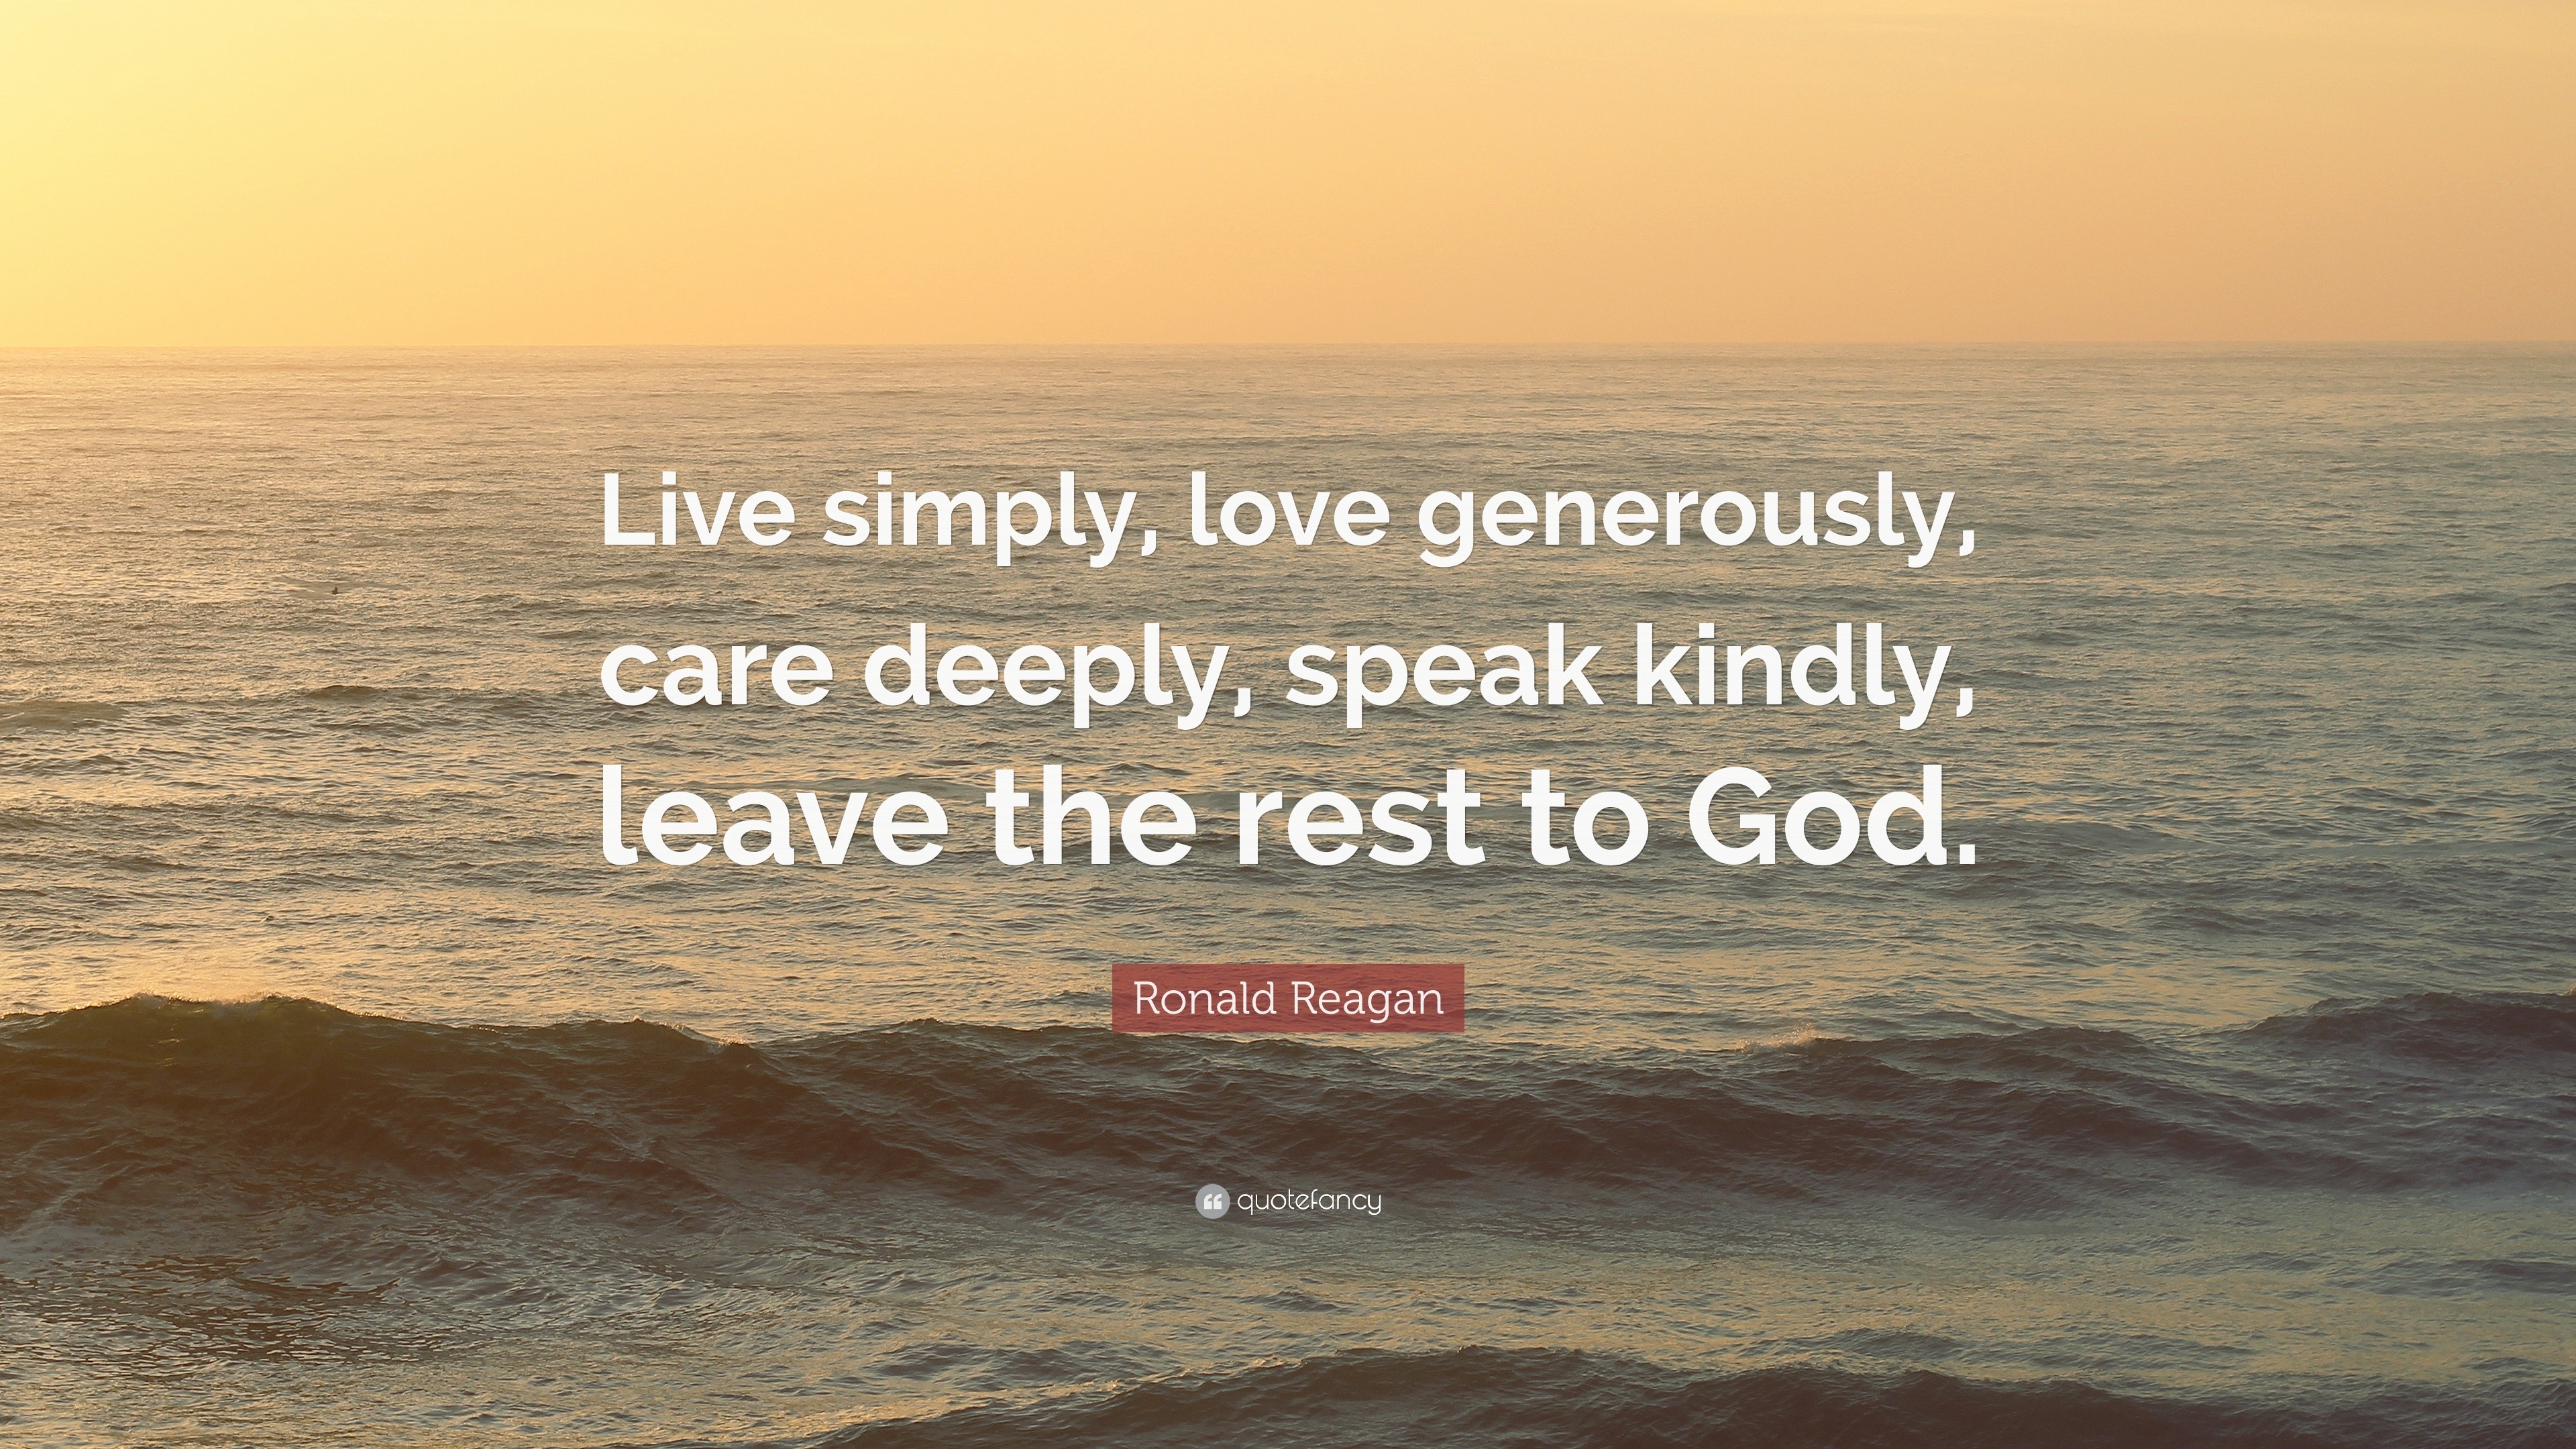 Ronald Reagan Quote: “Live simply, love generously, care deeply, speak ...